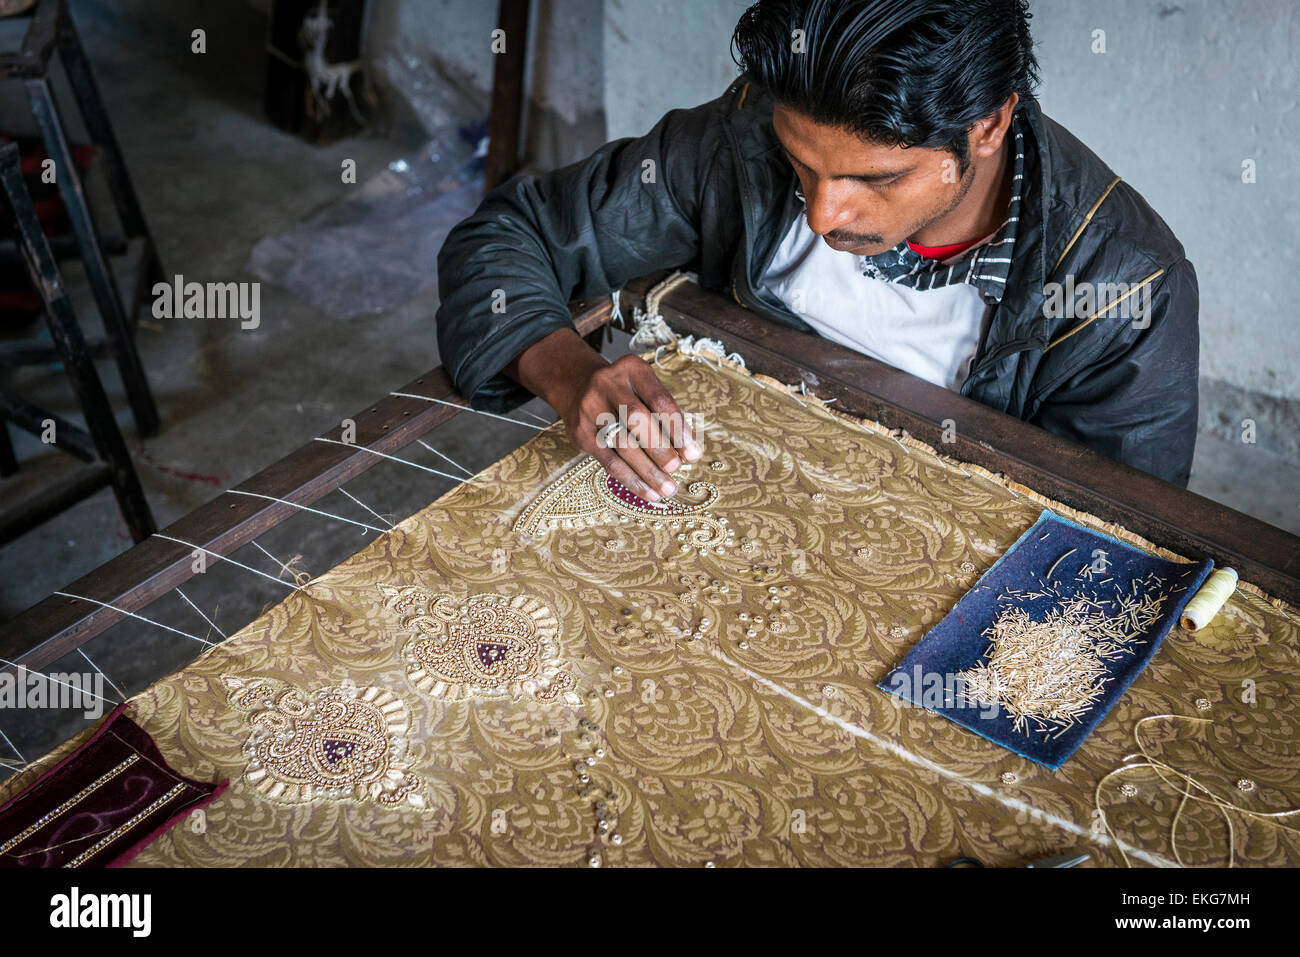 Craftsman hand embroidering fabric with gems and sequins in a textile factory in Jaipur, Rajasthan, India Stock Photo